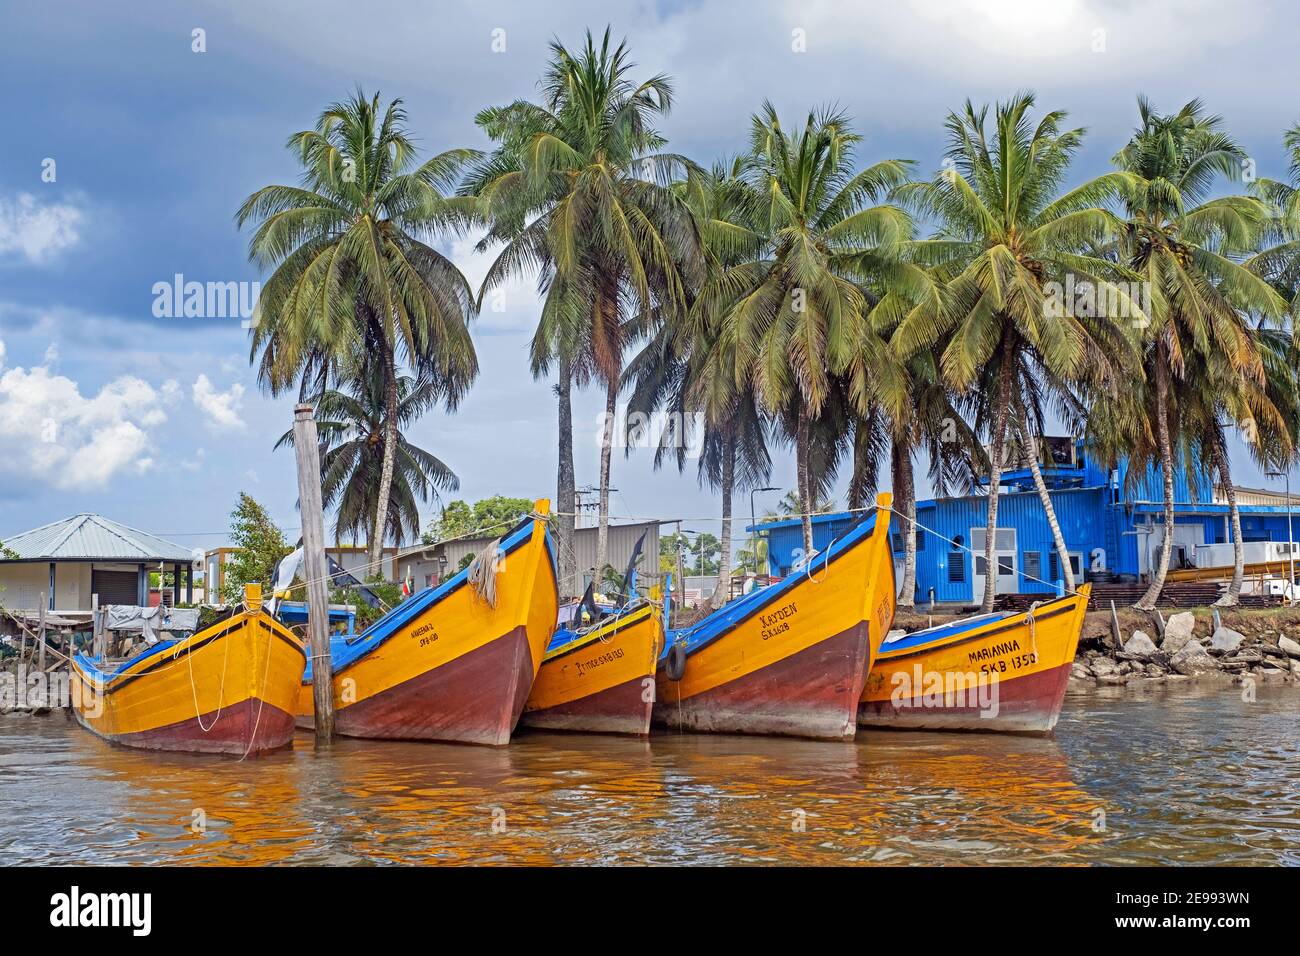 Traditional colourful wooden fishing boats in the harbour of New Amsterdam / Nieuw Amsterdam along the Suriname river, Commewijne District, Suriname Stock Photo